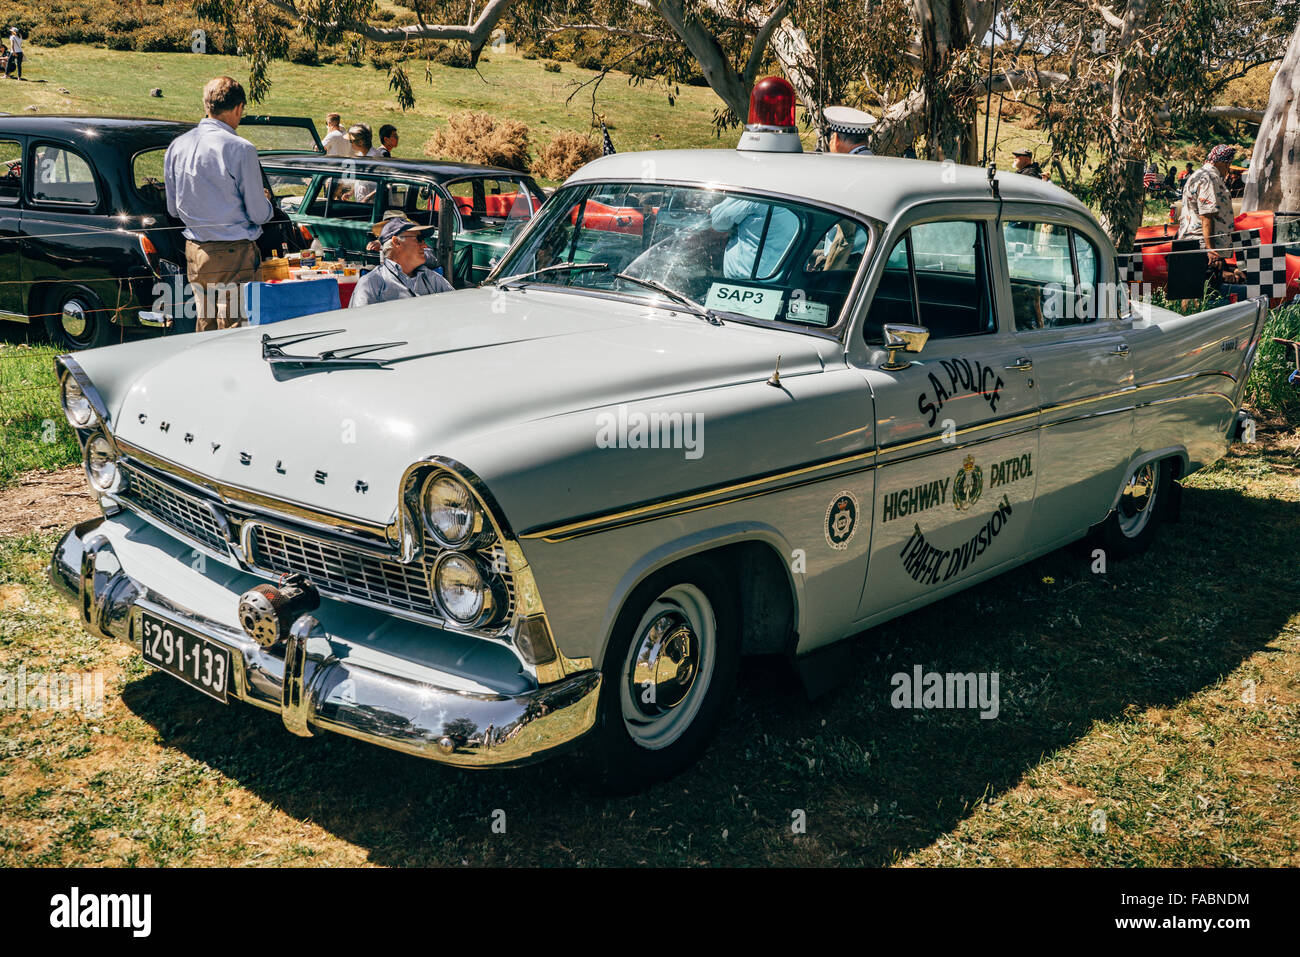 The Bay to Birdwood Classic is for vehicles manufactured between 1956 and 31 December 1978, cars, festivals,old,  vintage, Stock Photo